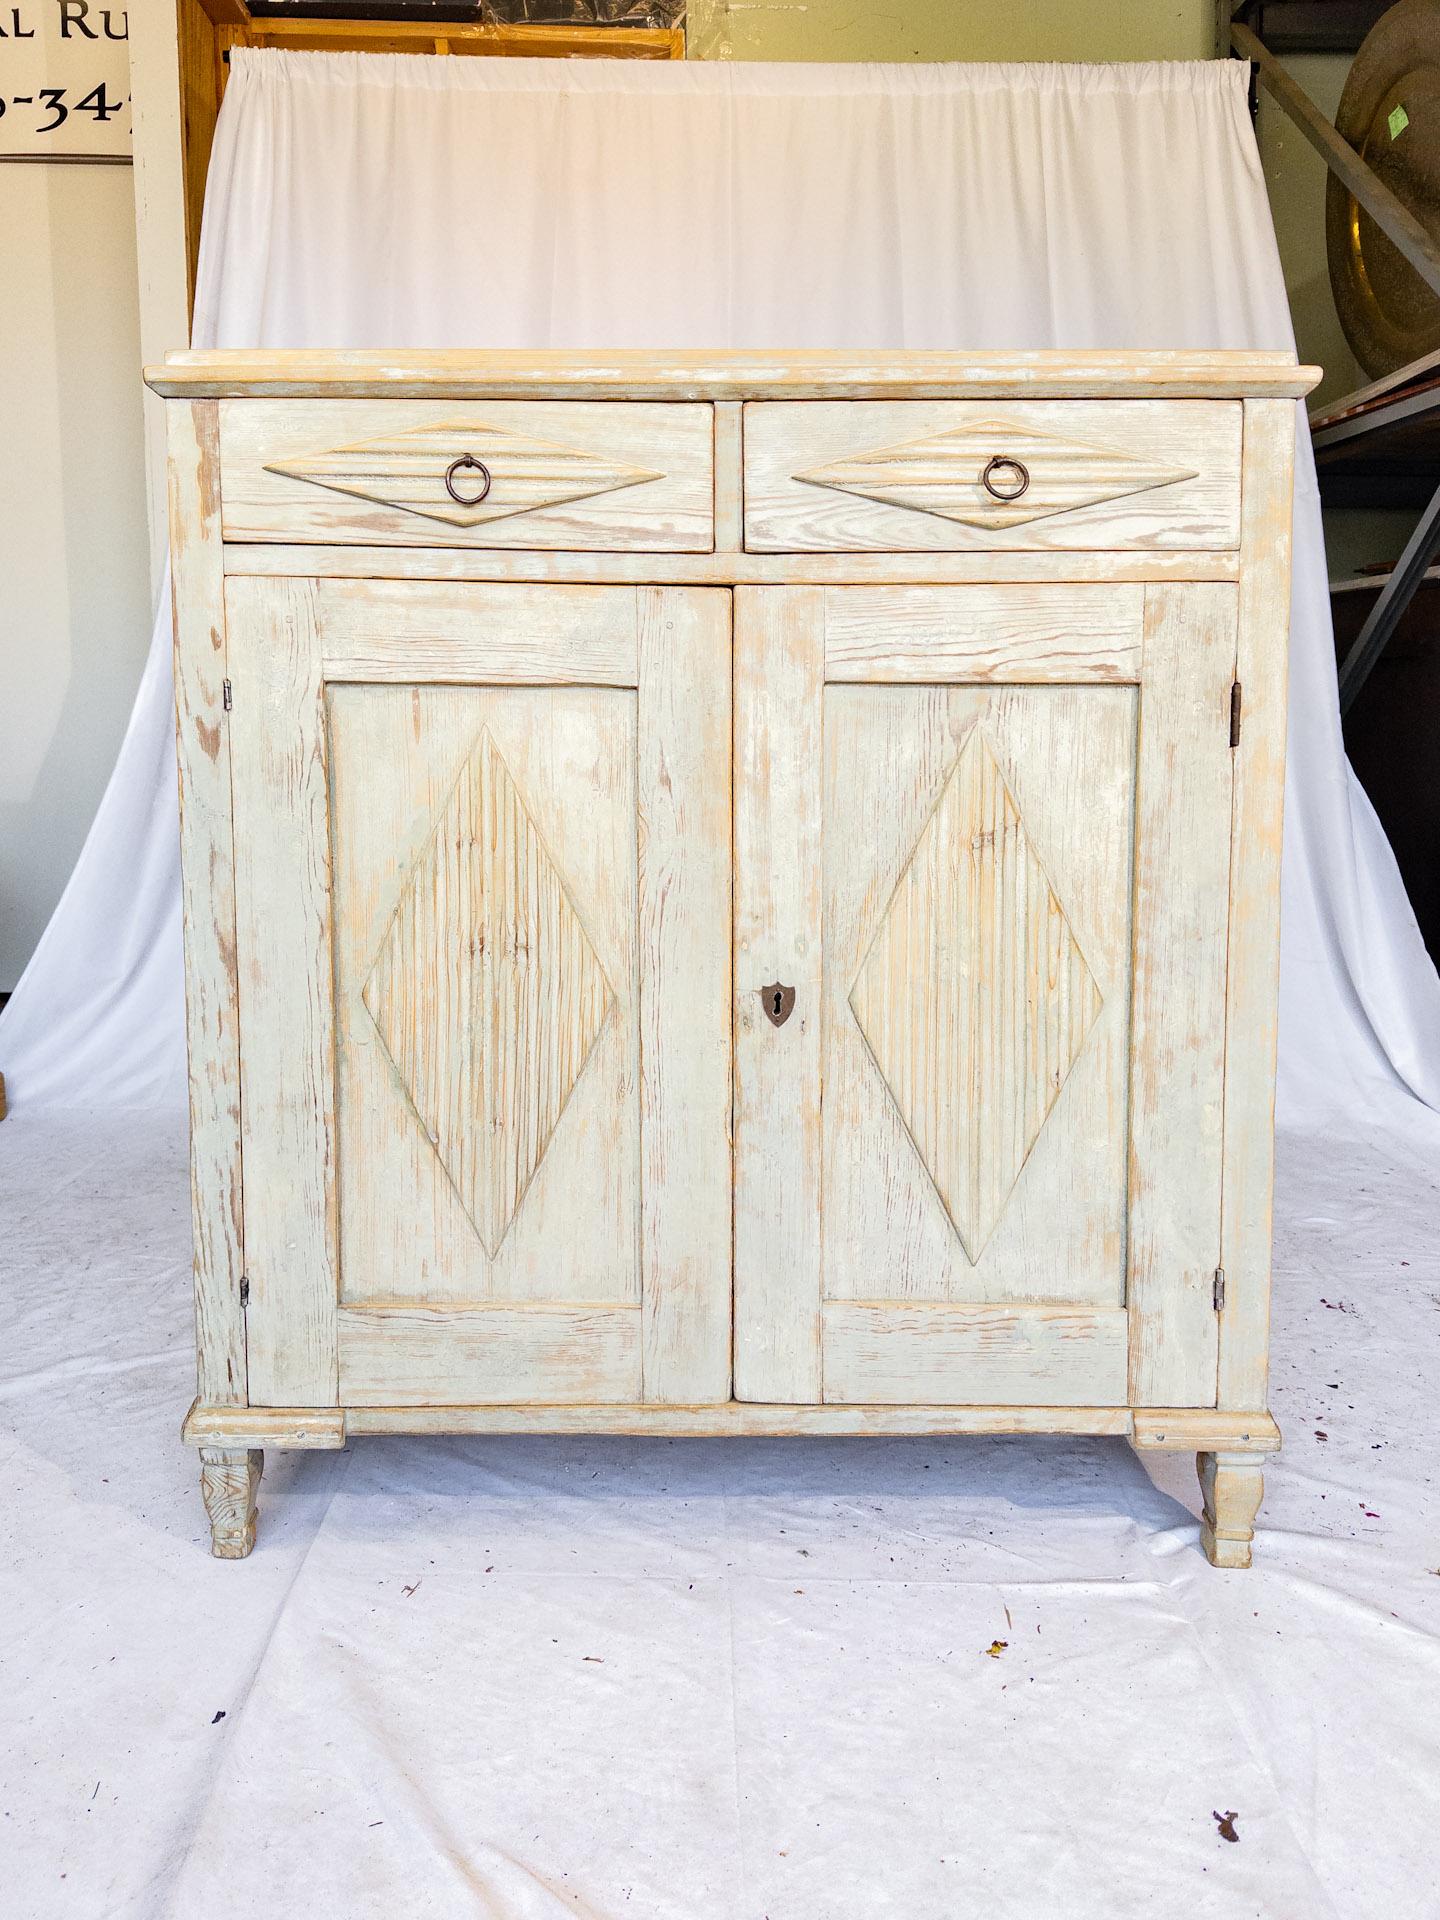 The Early 20th Century Swedish Gustavian Buffet embodies the refined elegance and craftsmanship characteristic of the Gustavian style. Crafted with meticulous attention to detail, it features two drawers and two doors providing ample storage space.